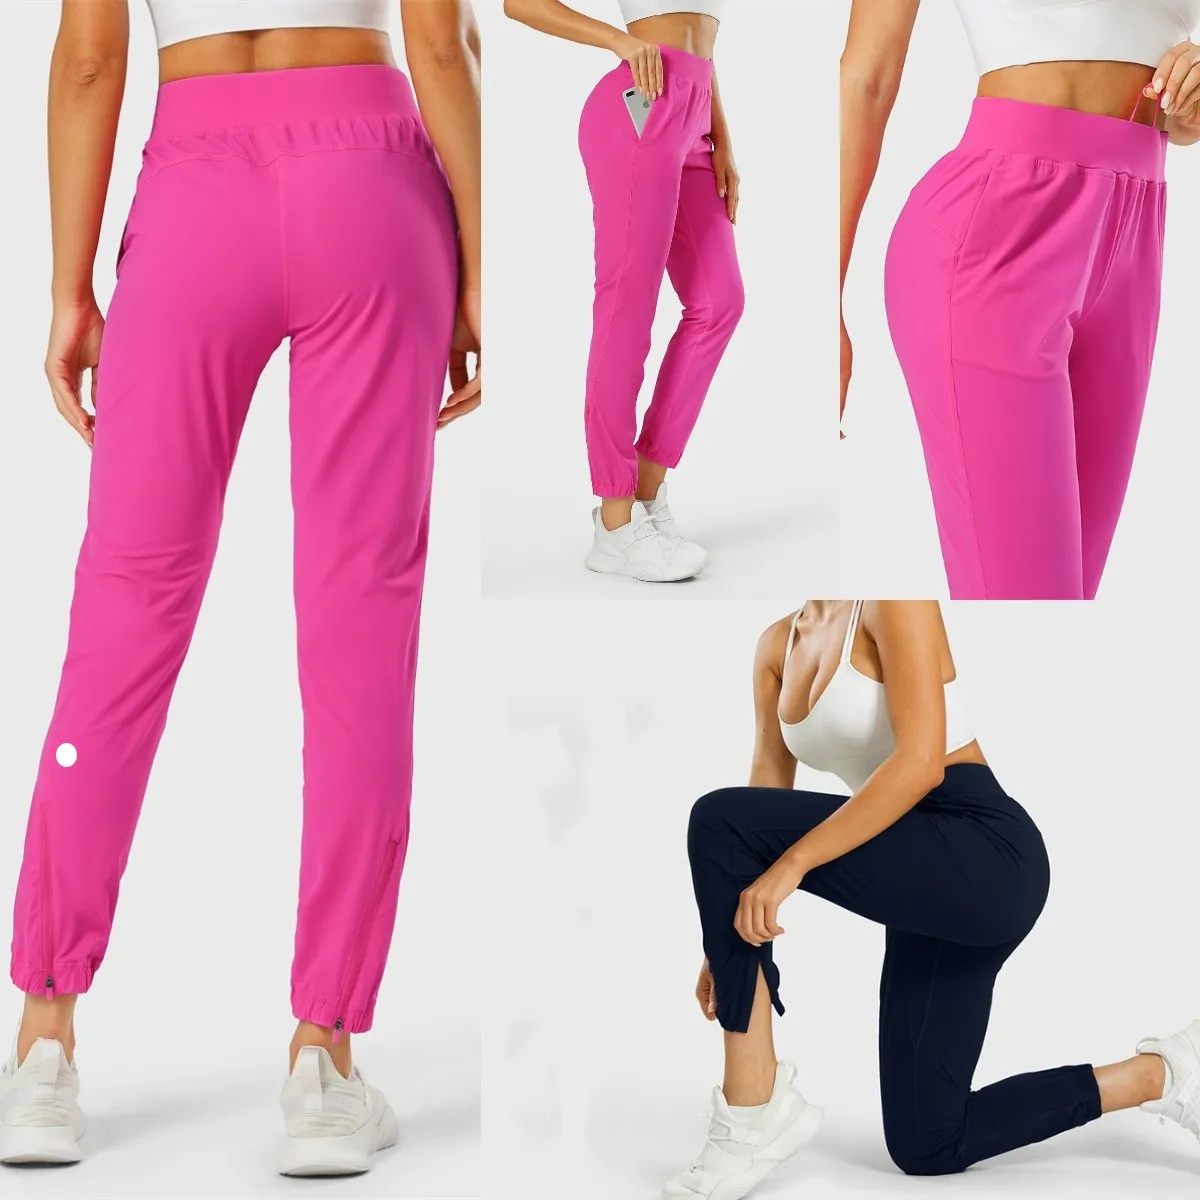 LU-1028 Women Yoga Wear Girl Jogging Pants Adapted State Stretchy High Waist Training Strap GYM Pants